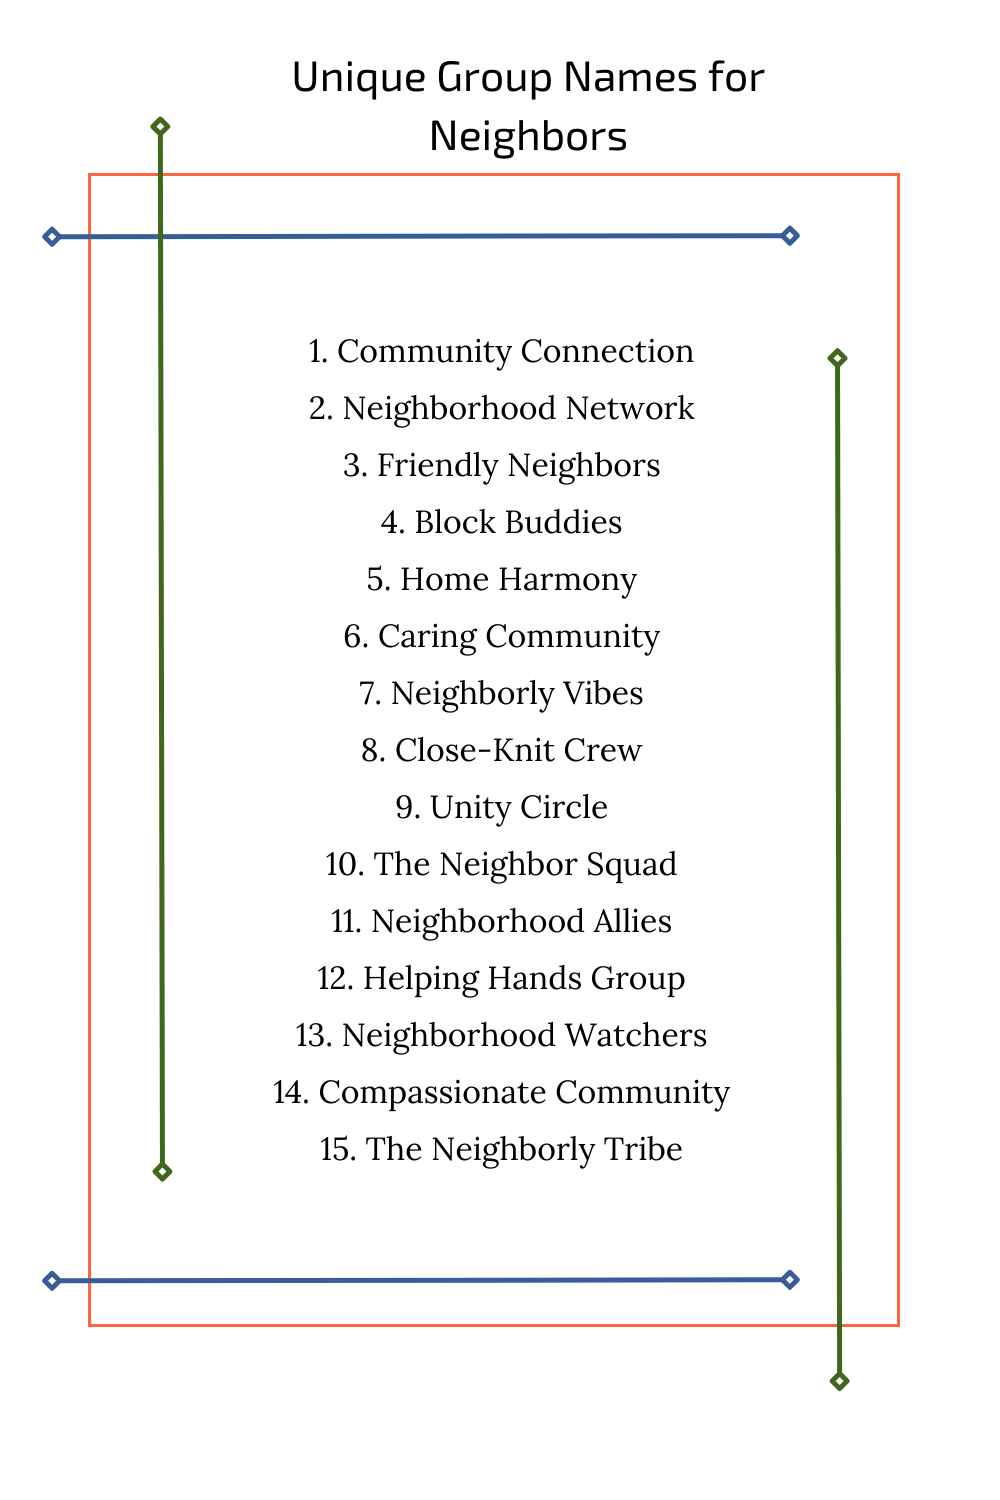 Unique Group Names for Neighbors